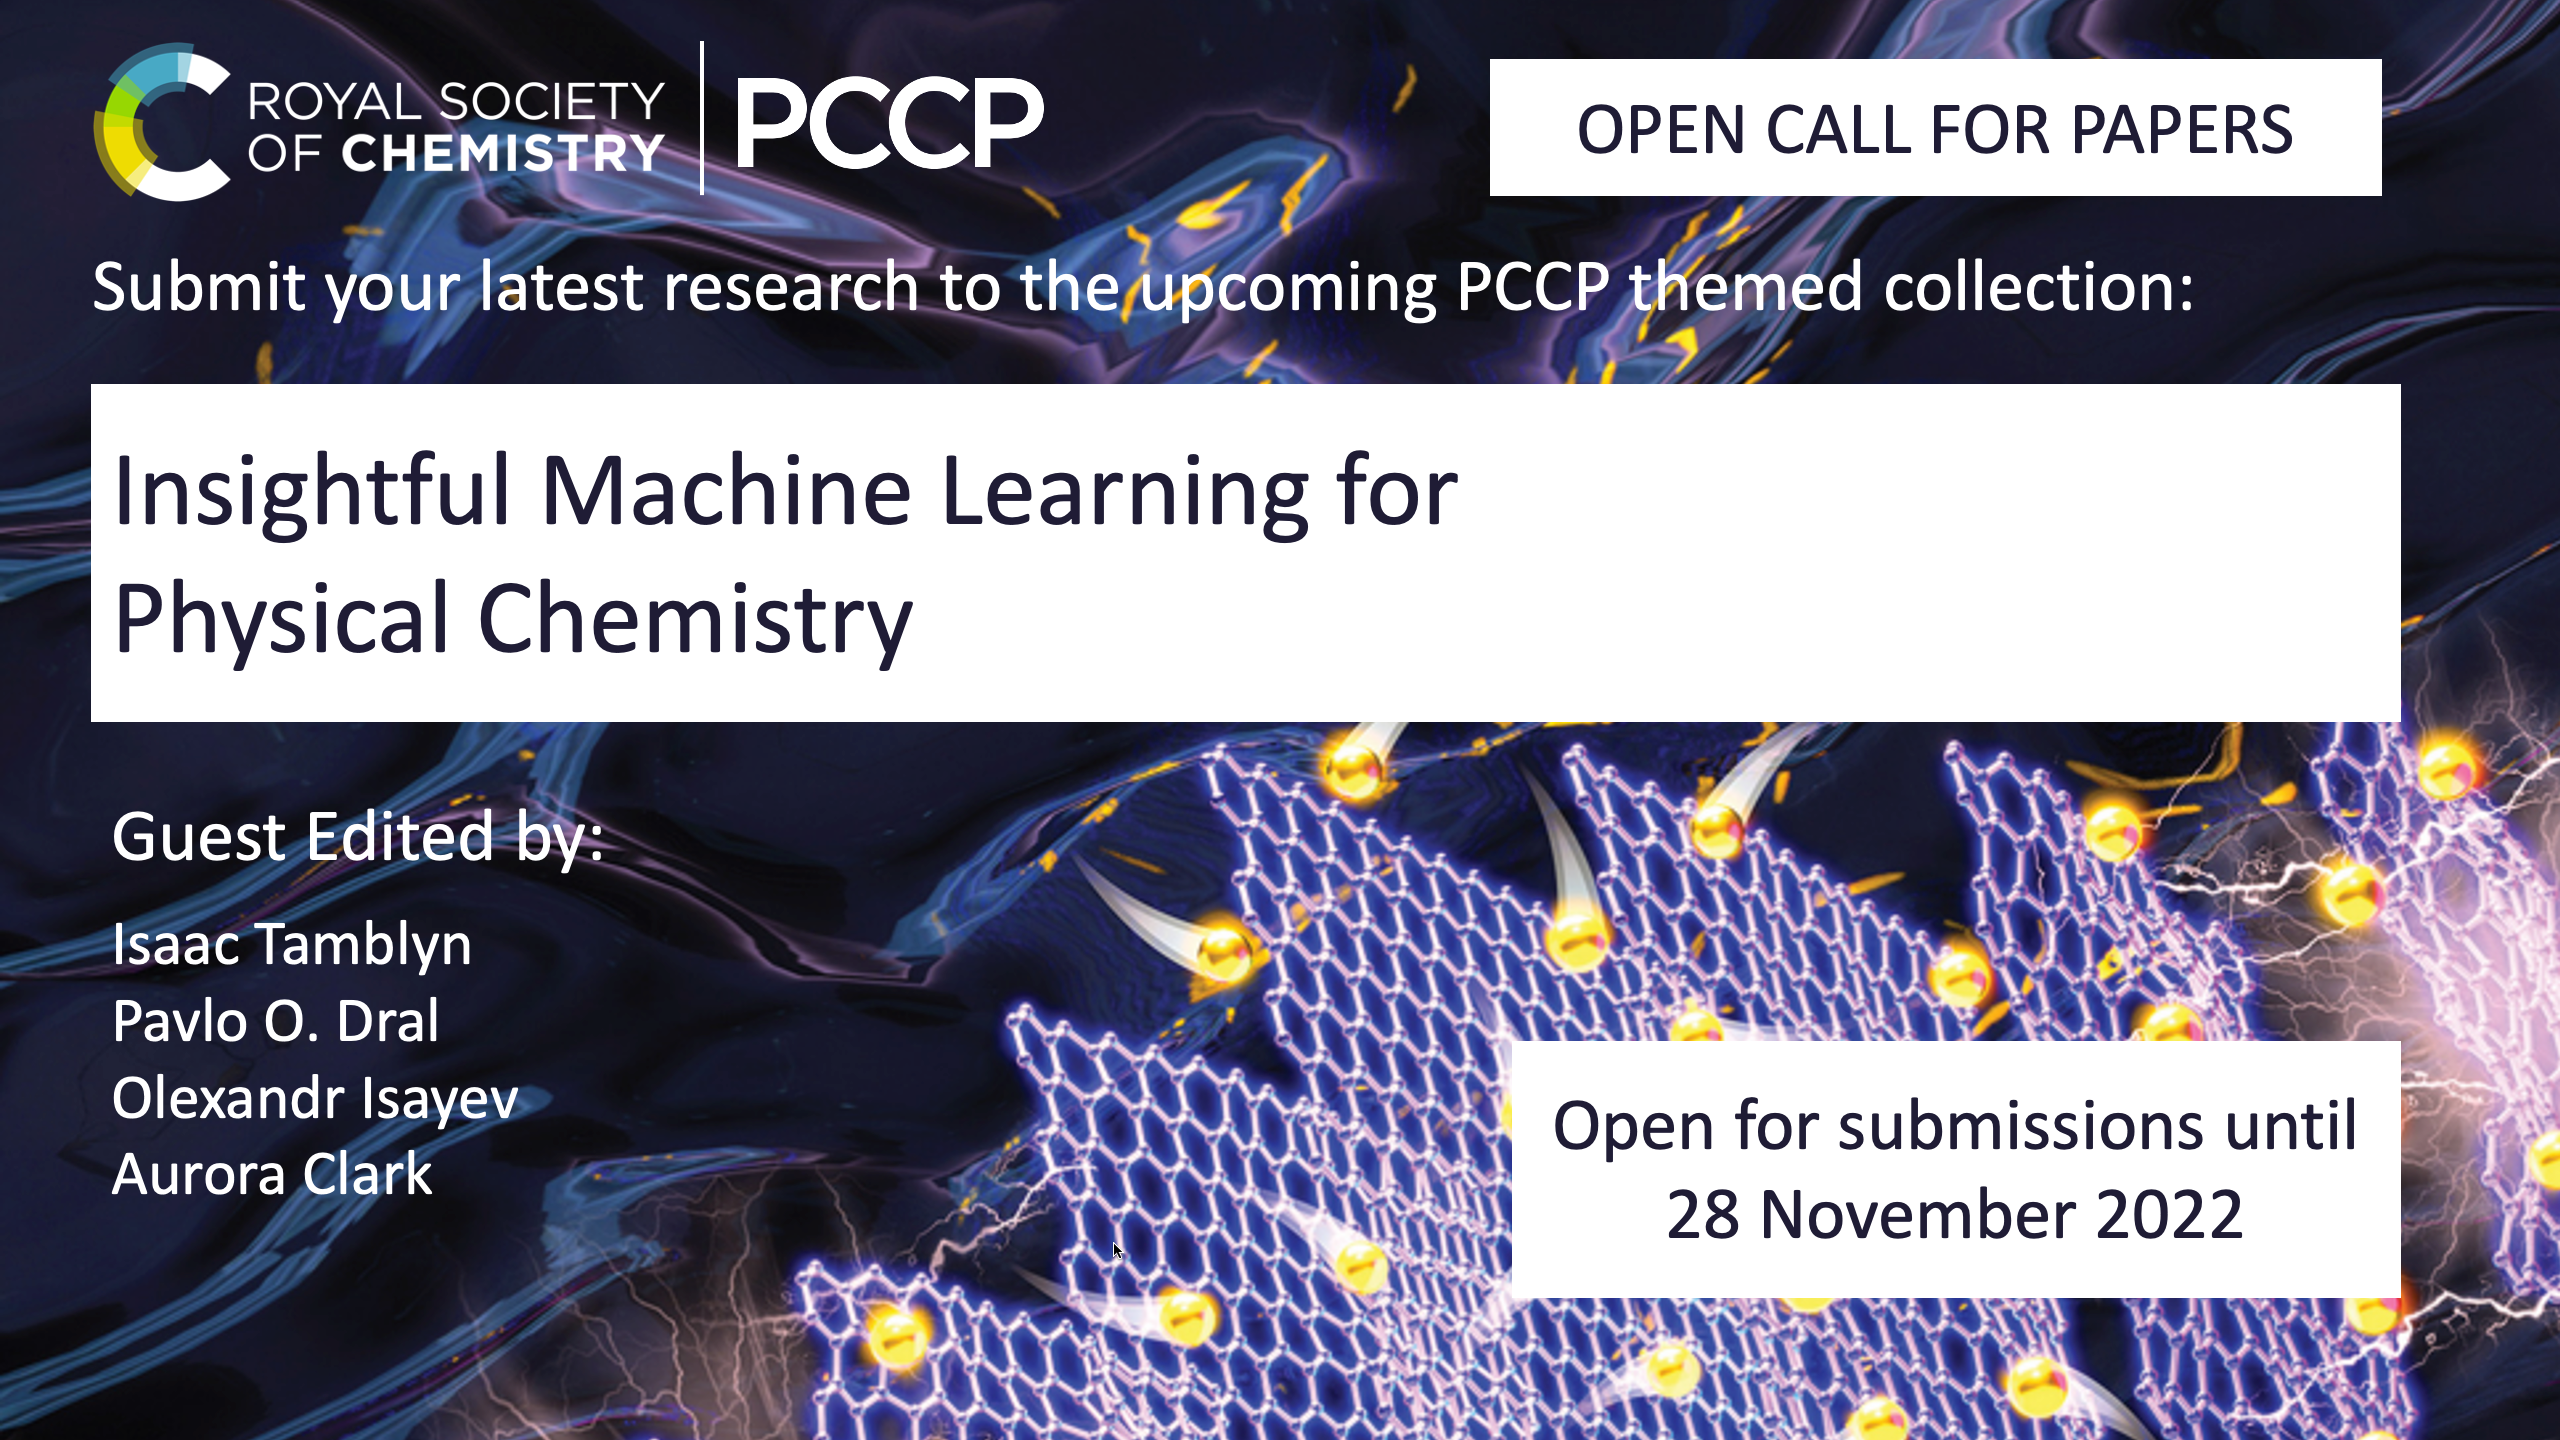 The themed collection and the editorial on Insightful machine learning for physical chemistry in finalized and published in PCCP